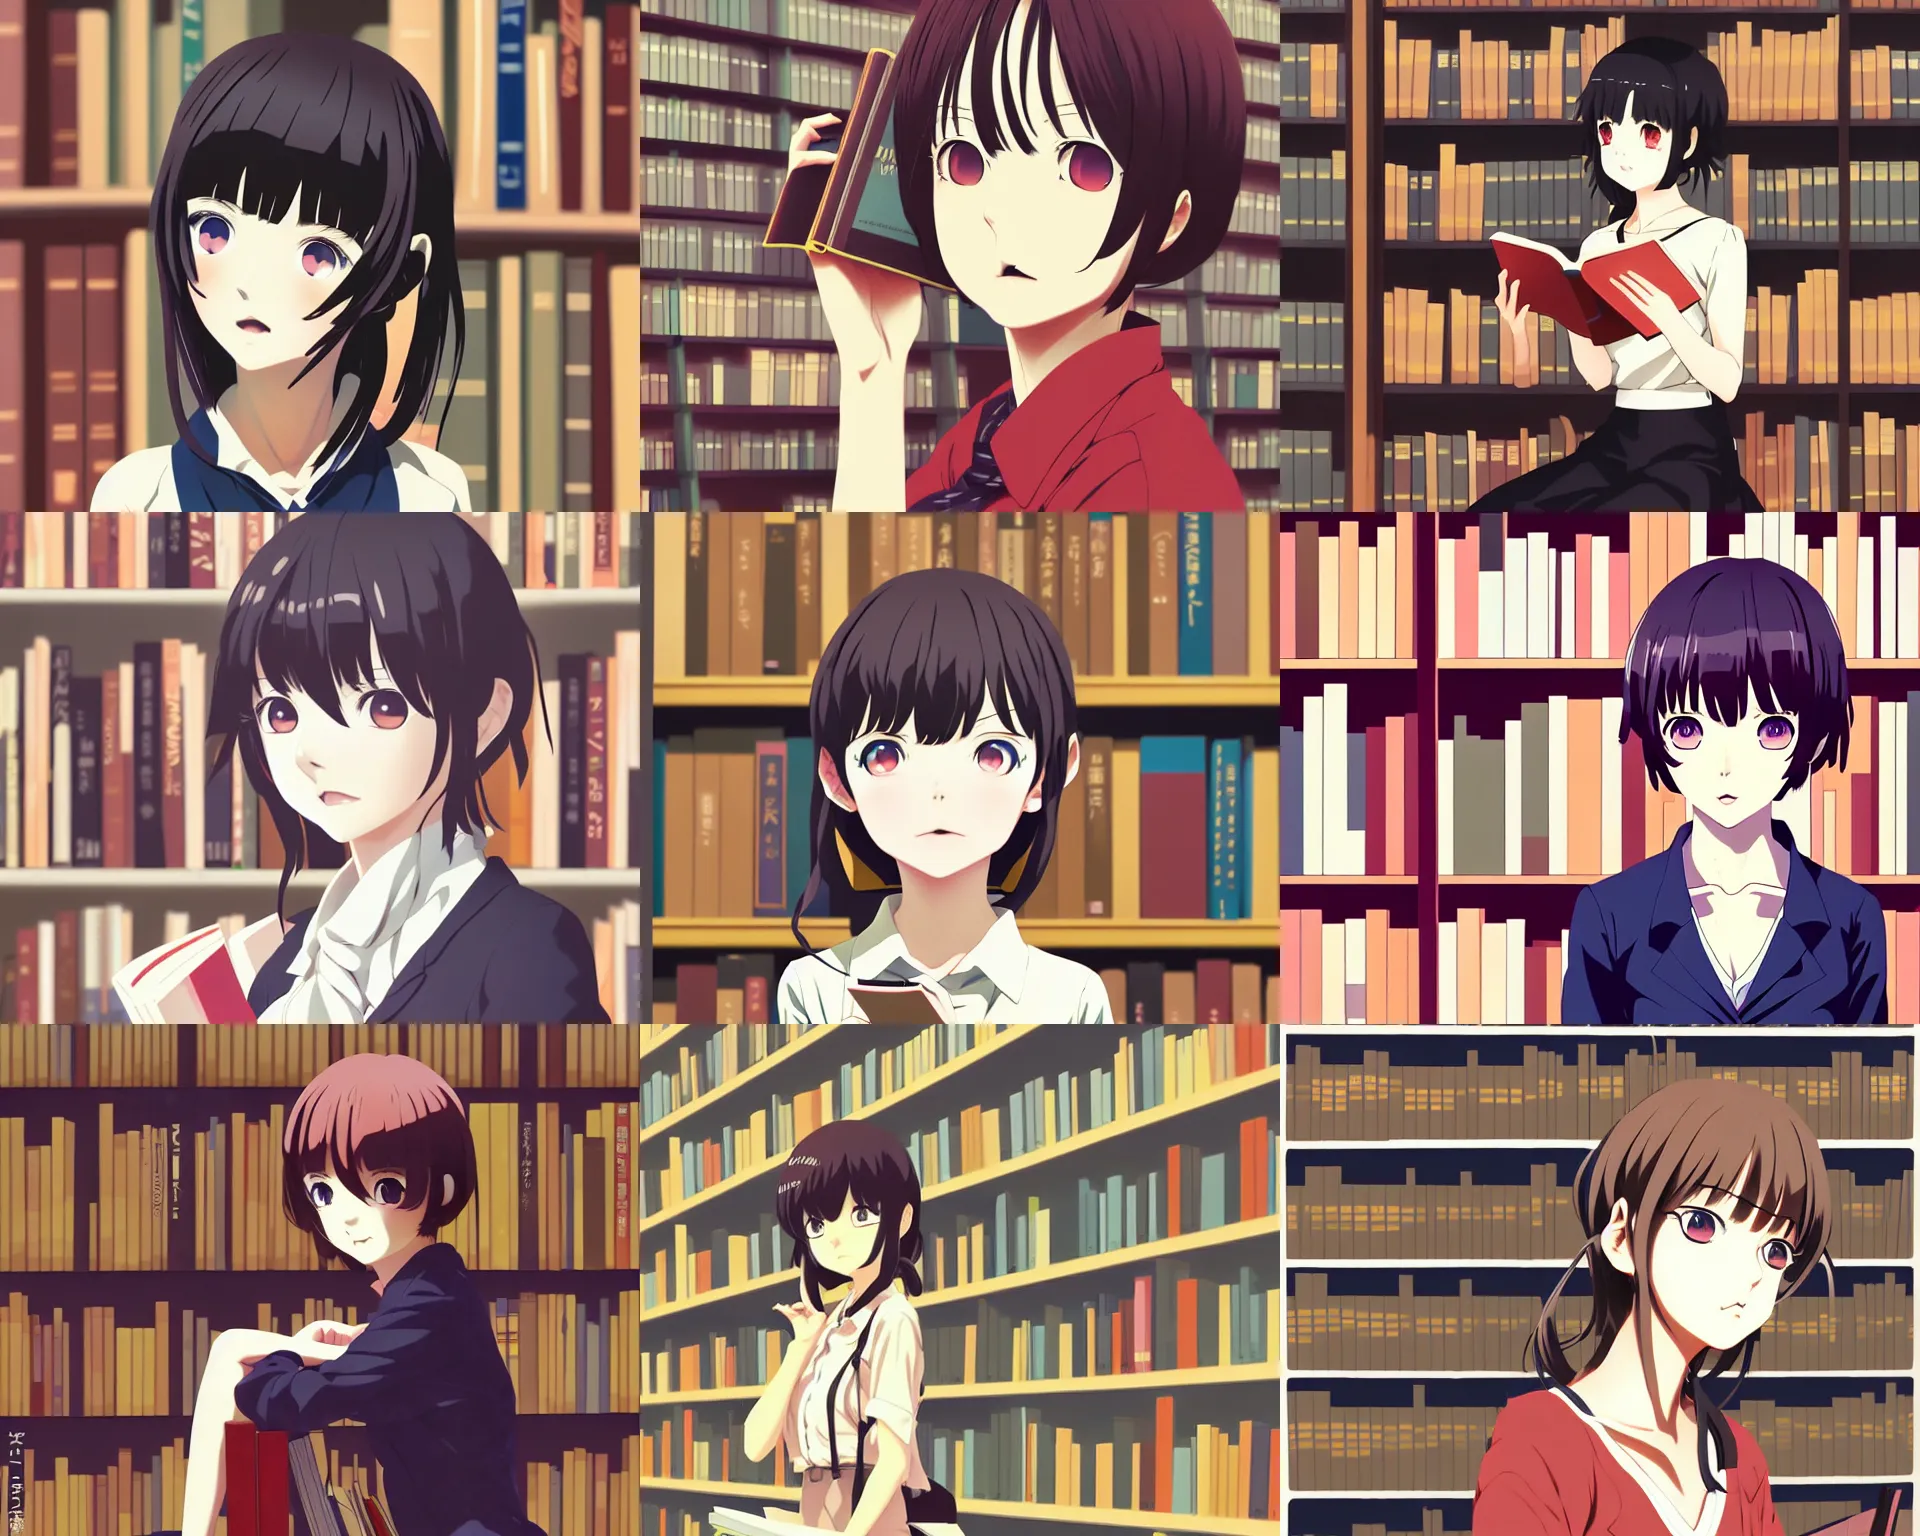 Prompt: anime visual, portrait of a young female traveler in library interior reading, cute face by ilya kuvshinov, yoh yoshinari, dynamic pose, dynamic perspective, cel shaded, flat shading mucha, rounded eyes, moody, psycho pass, kyoani, paprika